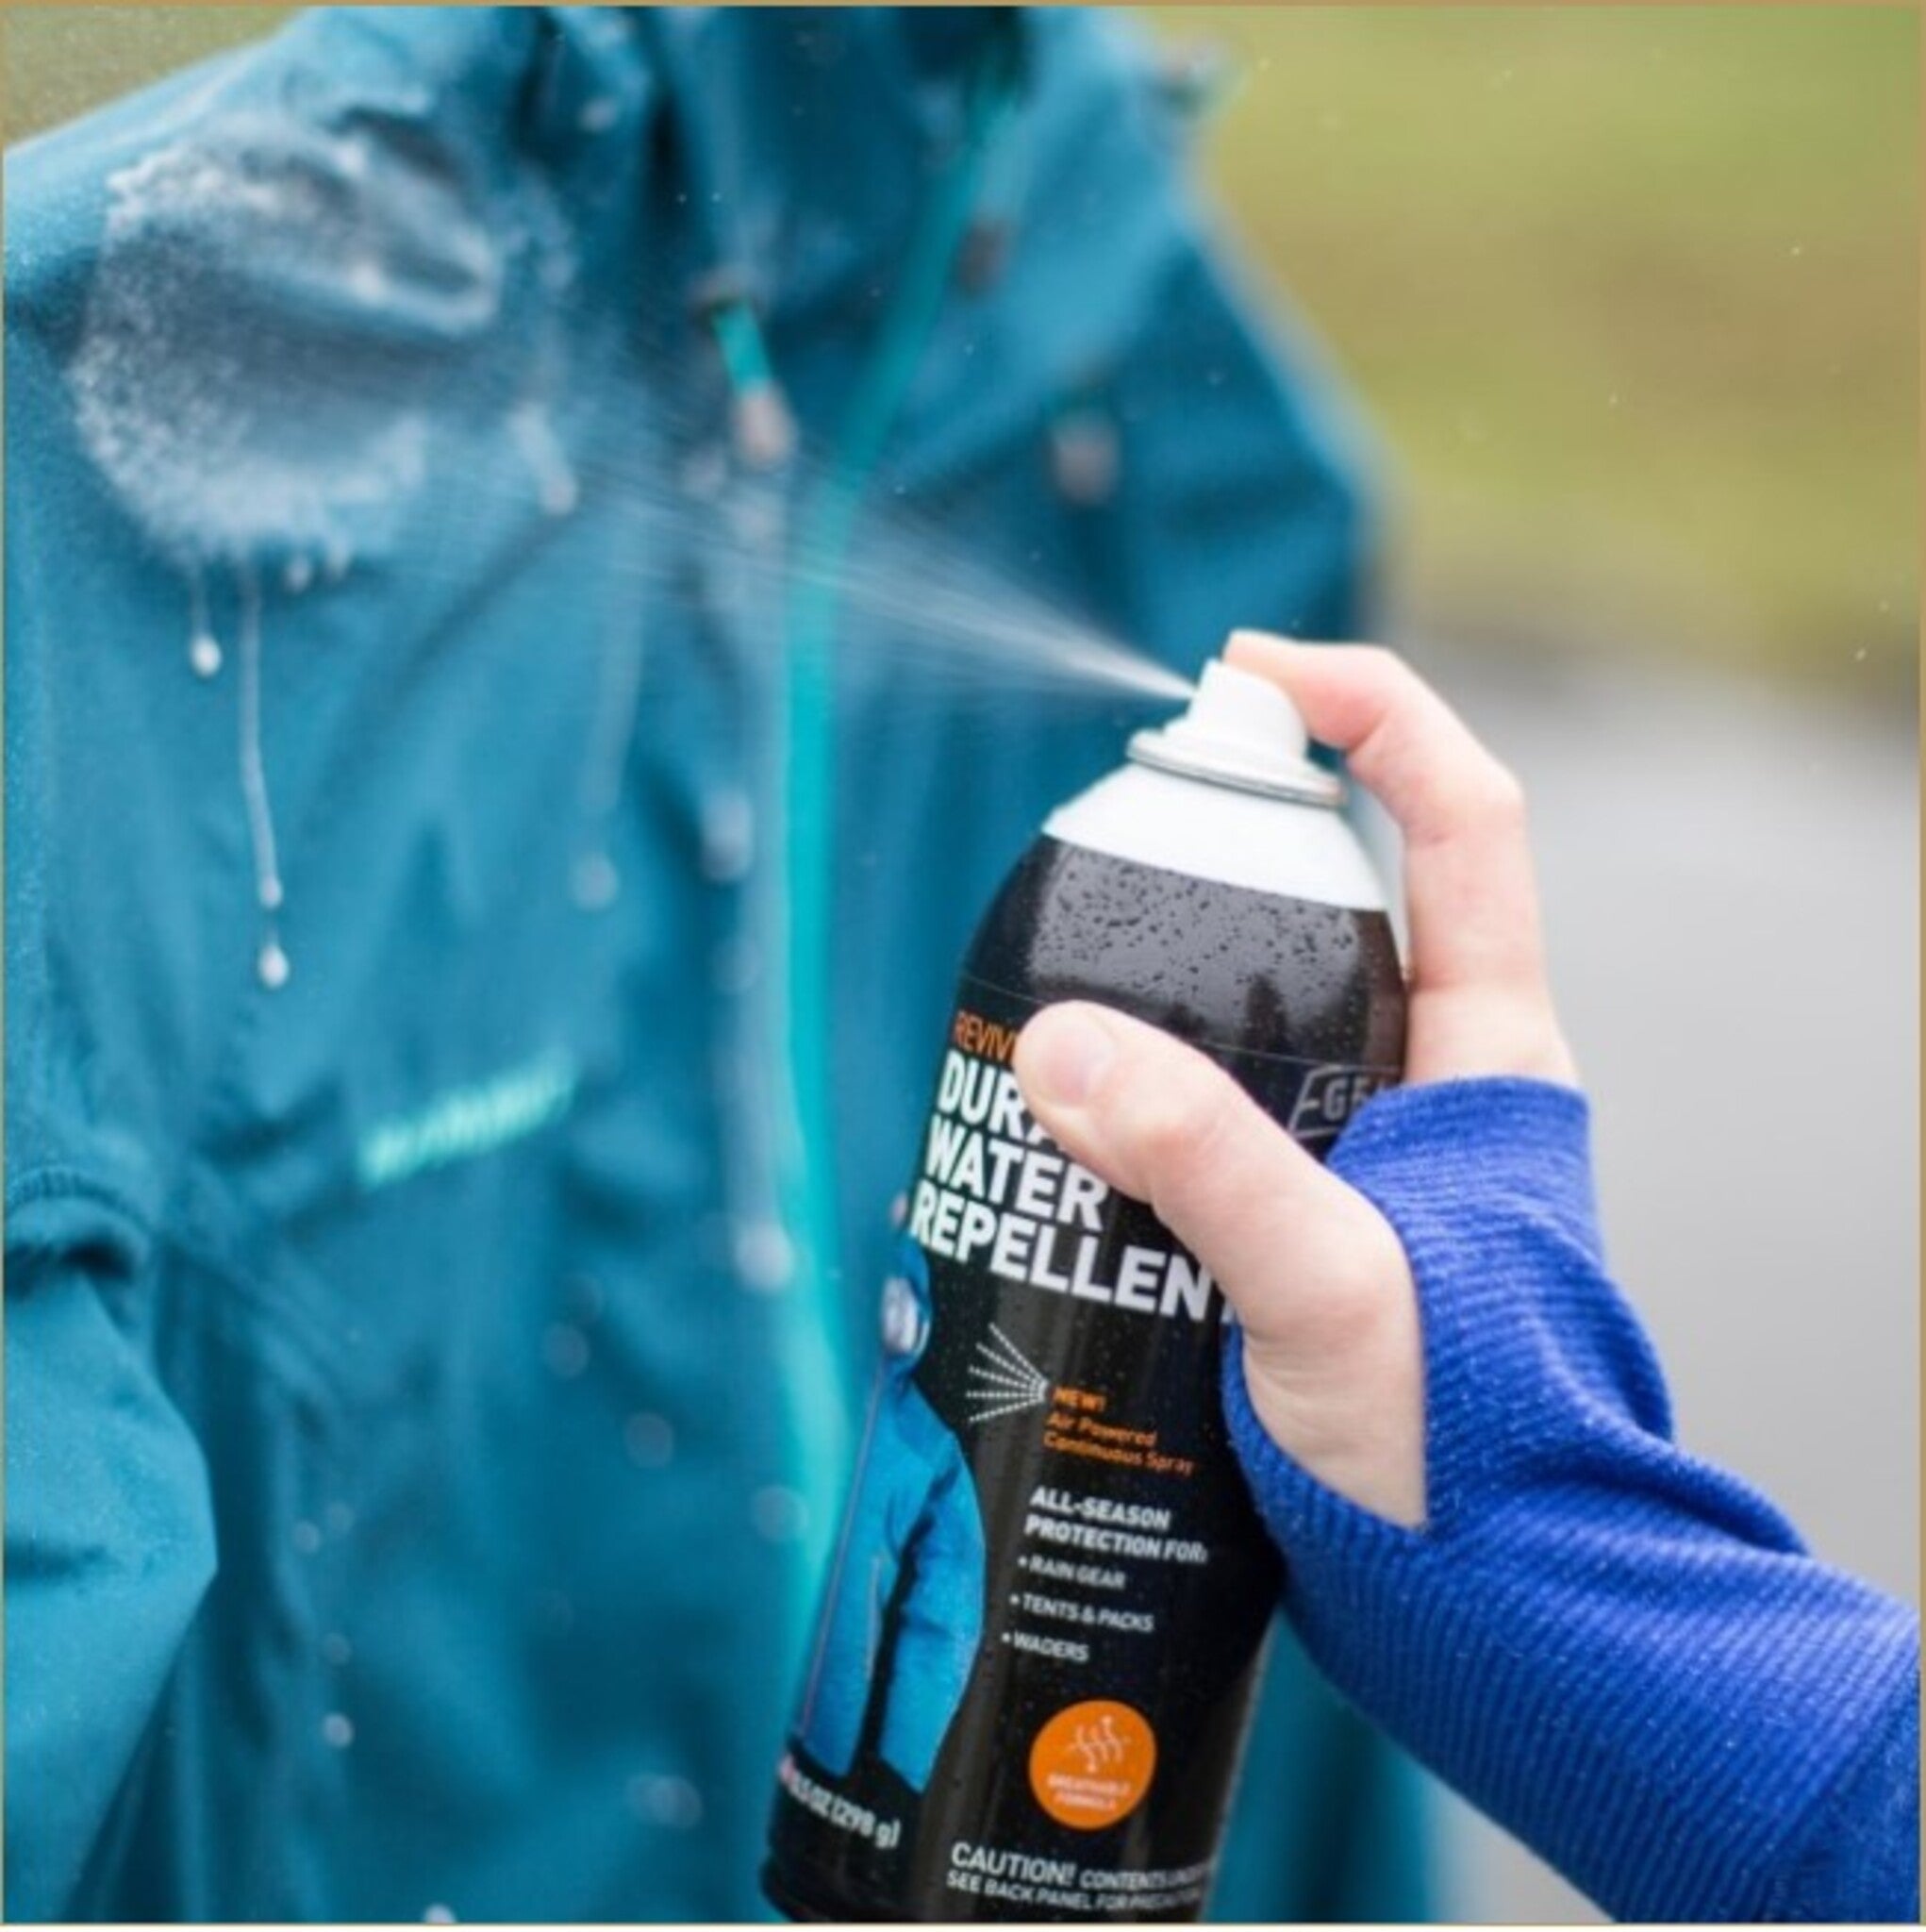 GEAR AID Revivex Durable Water Repellent 長效防潑水噴劑 36221